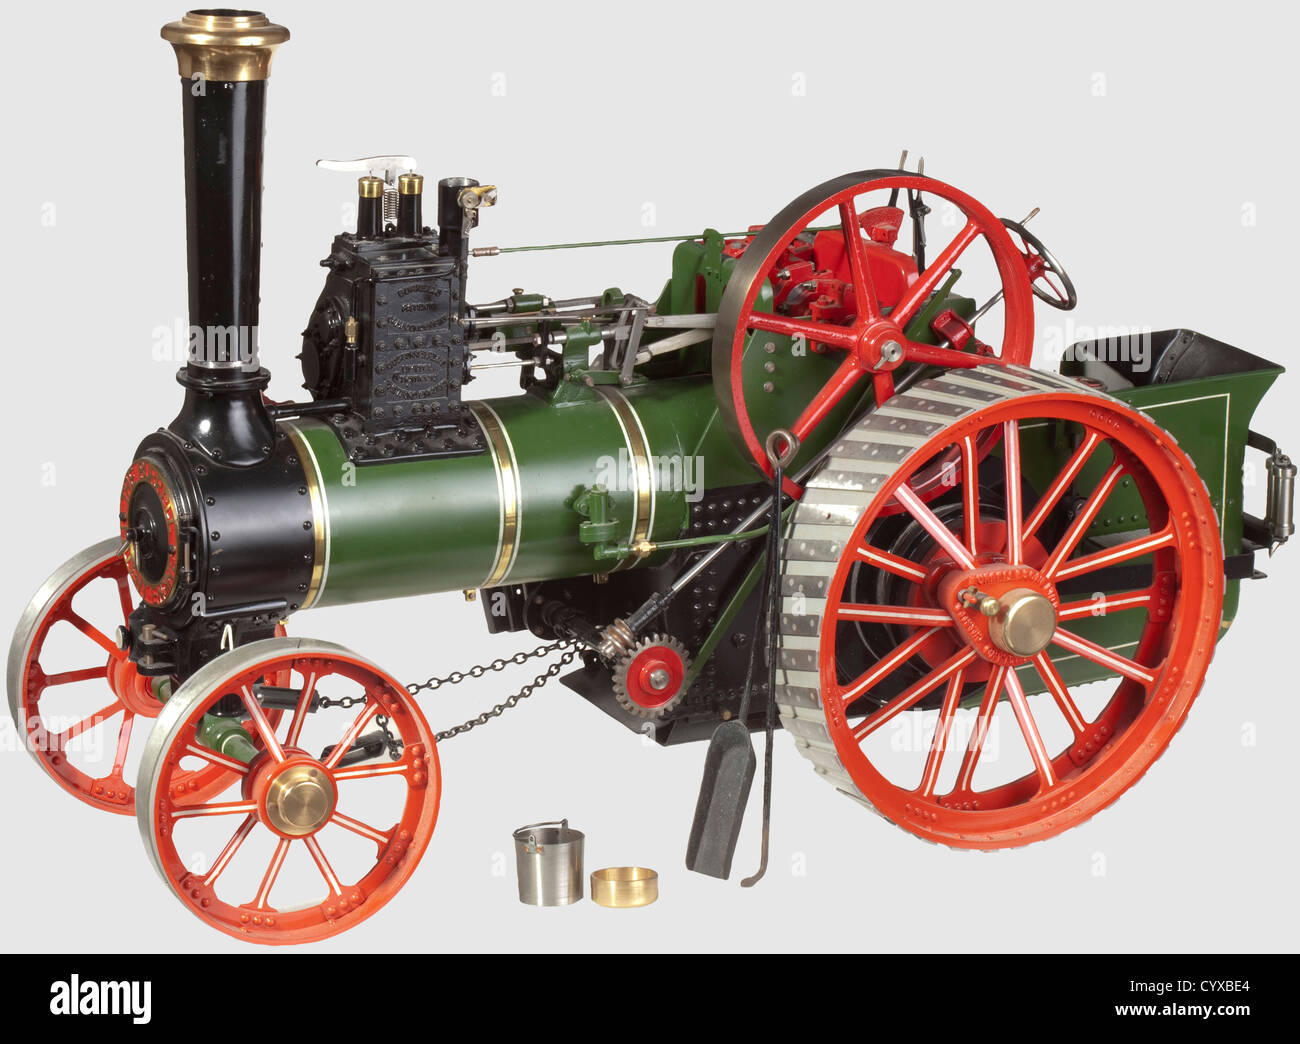 A well emgineered 1.5in scale model of a BURRELL 'DEVONSHIRE',single crank compound two speed three shaft general purpose traction engine. With braised copper boiler with normal fittings,two cylinders 0.5in and 7/8th in bores x 1.25in stroke,LP cylinder draincocks and pipes,mechanical lubricator,Stephenson's link reverse,eccentric driven feed pump and bypass,two road speeds and spoked flywheel. Chassis details include spoked,straked wheels,chain steering,damper,band brake to rear axle and many other details,finished in green,red and black with whit,Additional-Rights-Clearences-Not Available Stock Photo